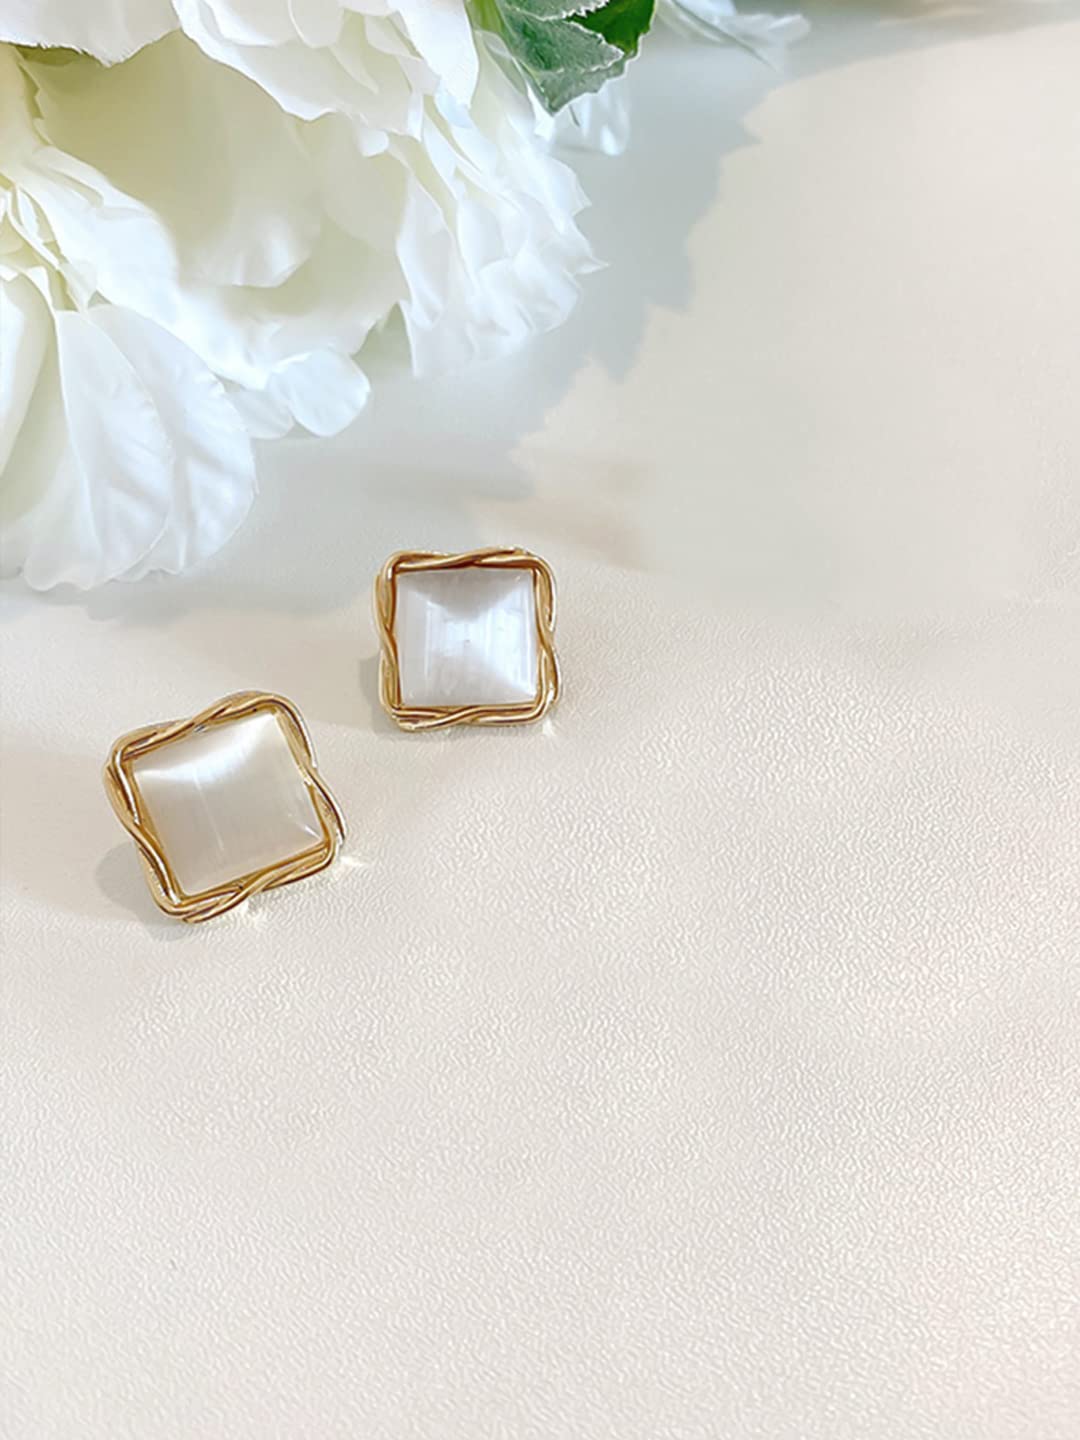 Yellow Chimes Earrings for Women and Girls Studs for Girls | Gold Tone Square Opal Stud Earrings | Birthday Gift for girls and women Anniversary Gift for Wife